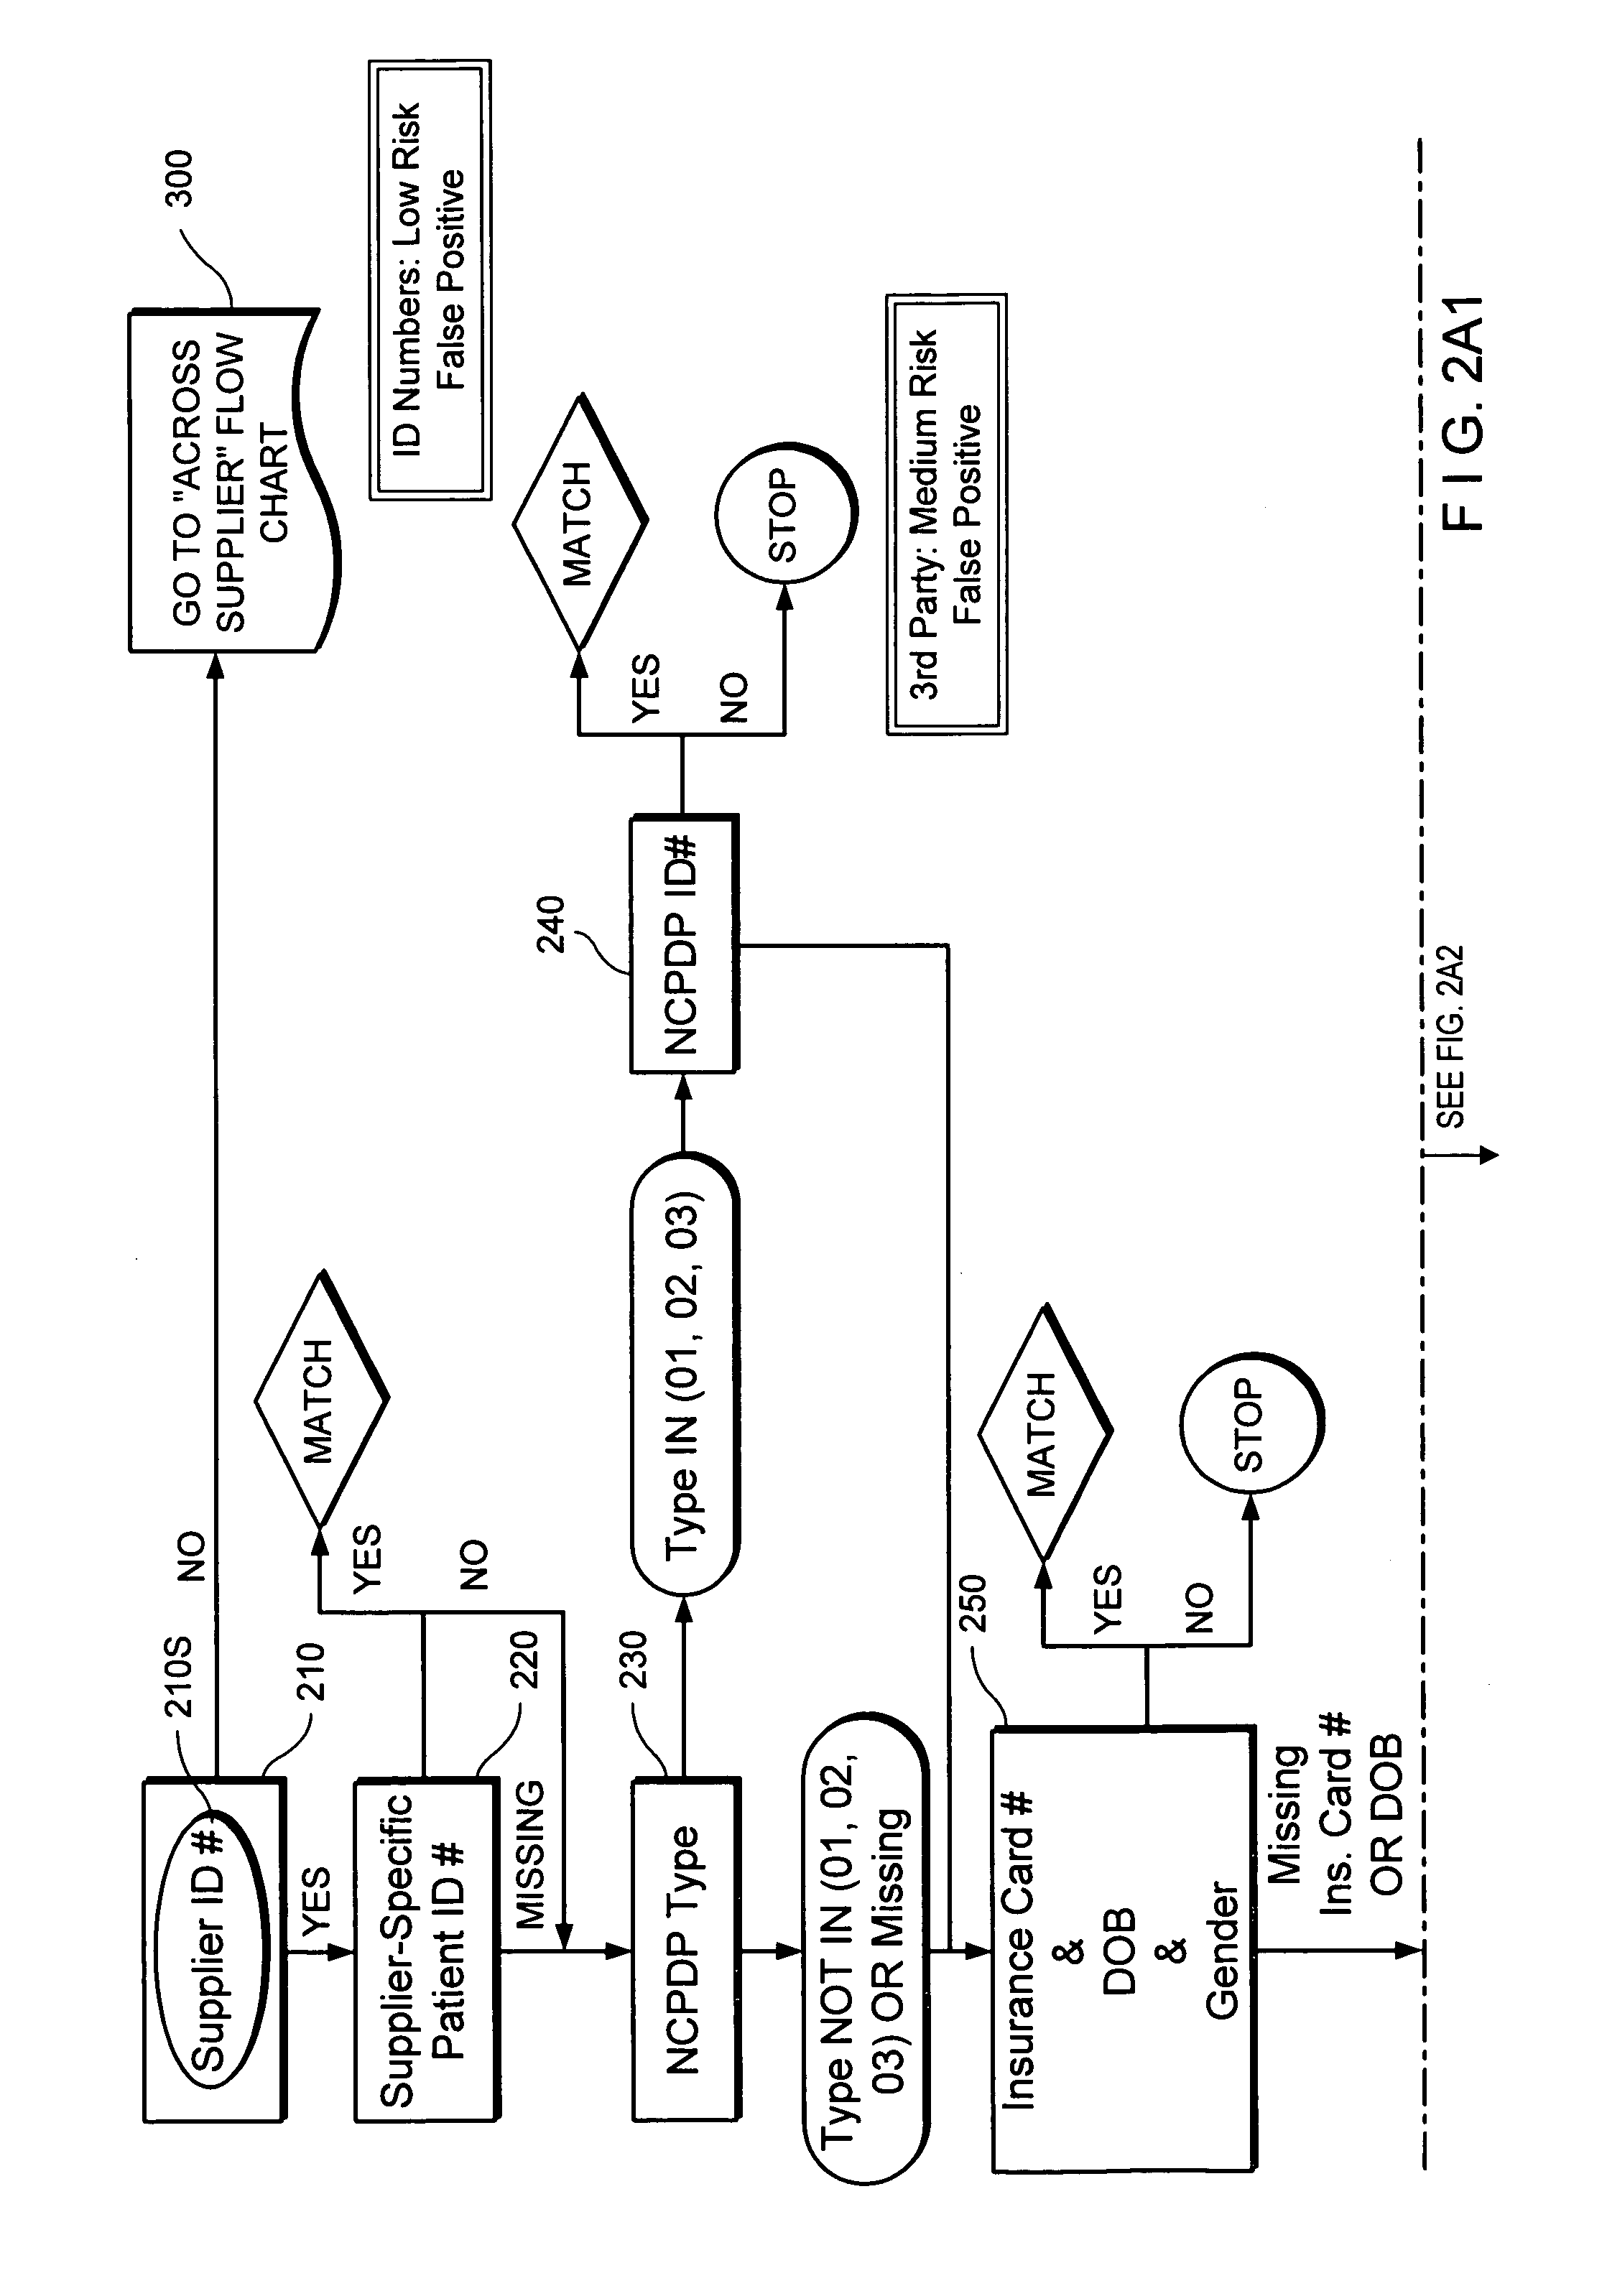 Method for linking de-identified patients using encrypted and unencrypted demographic and healthcare information from multiple data sources